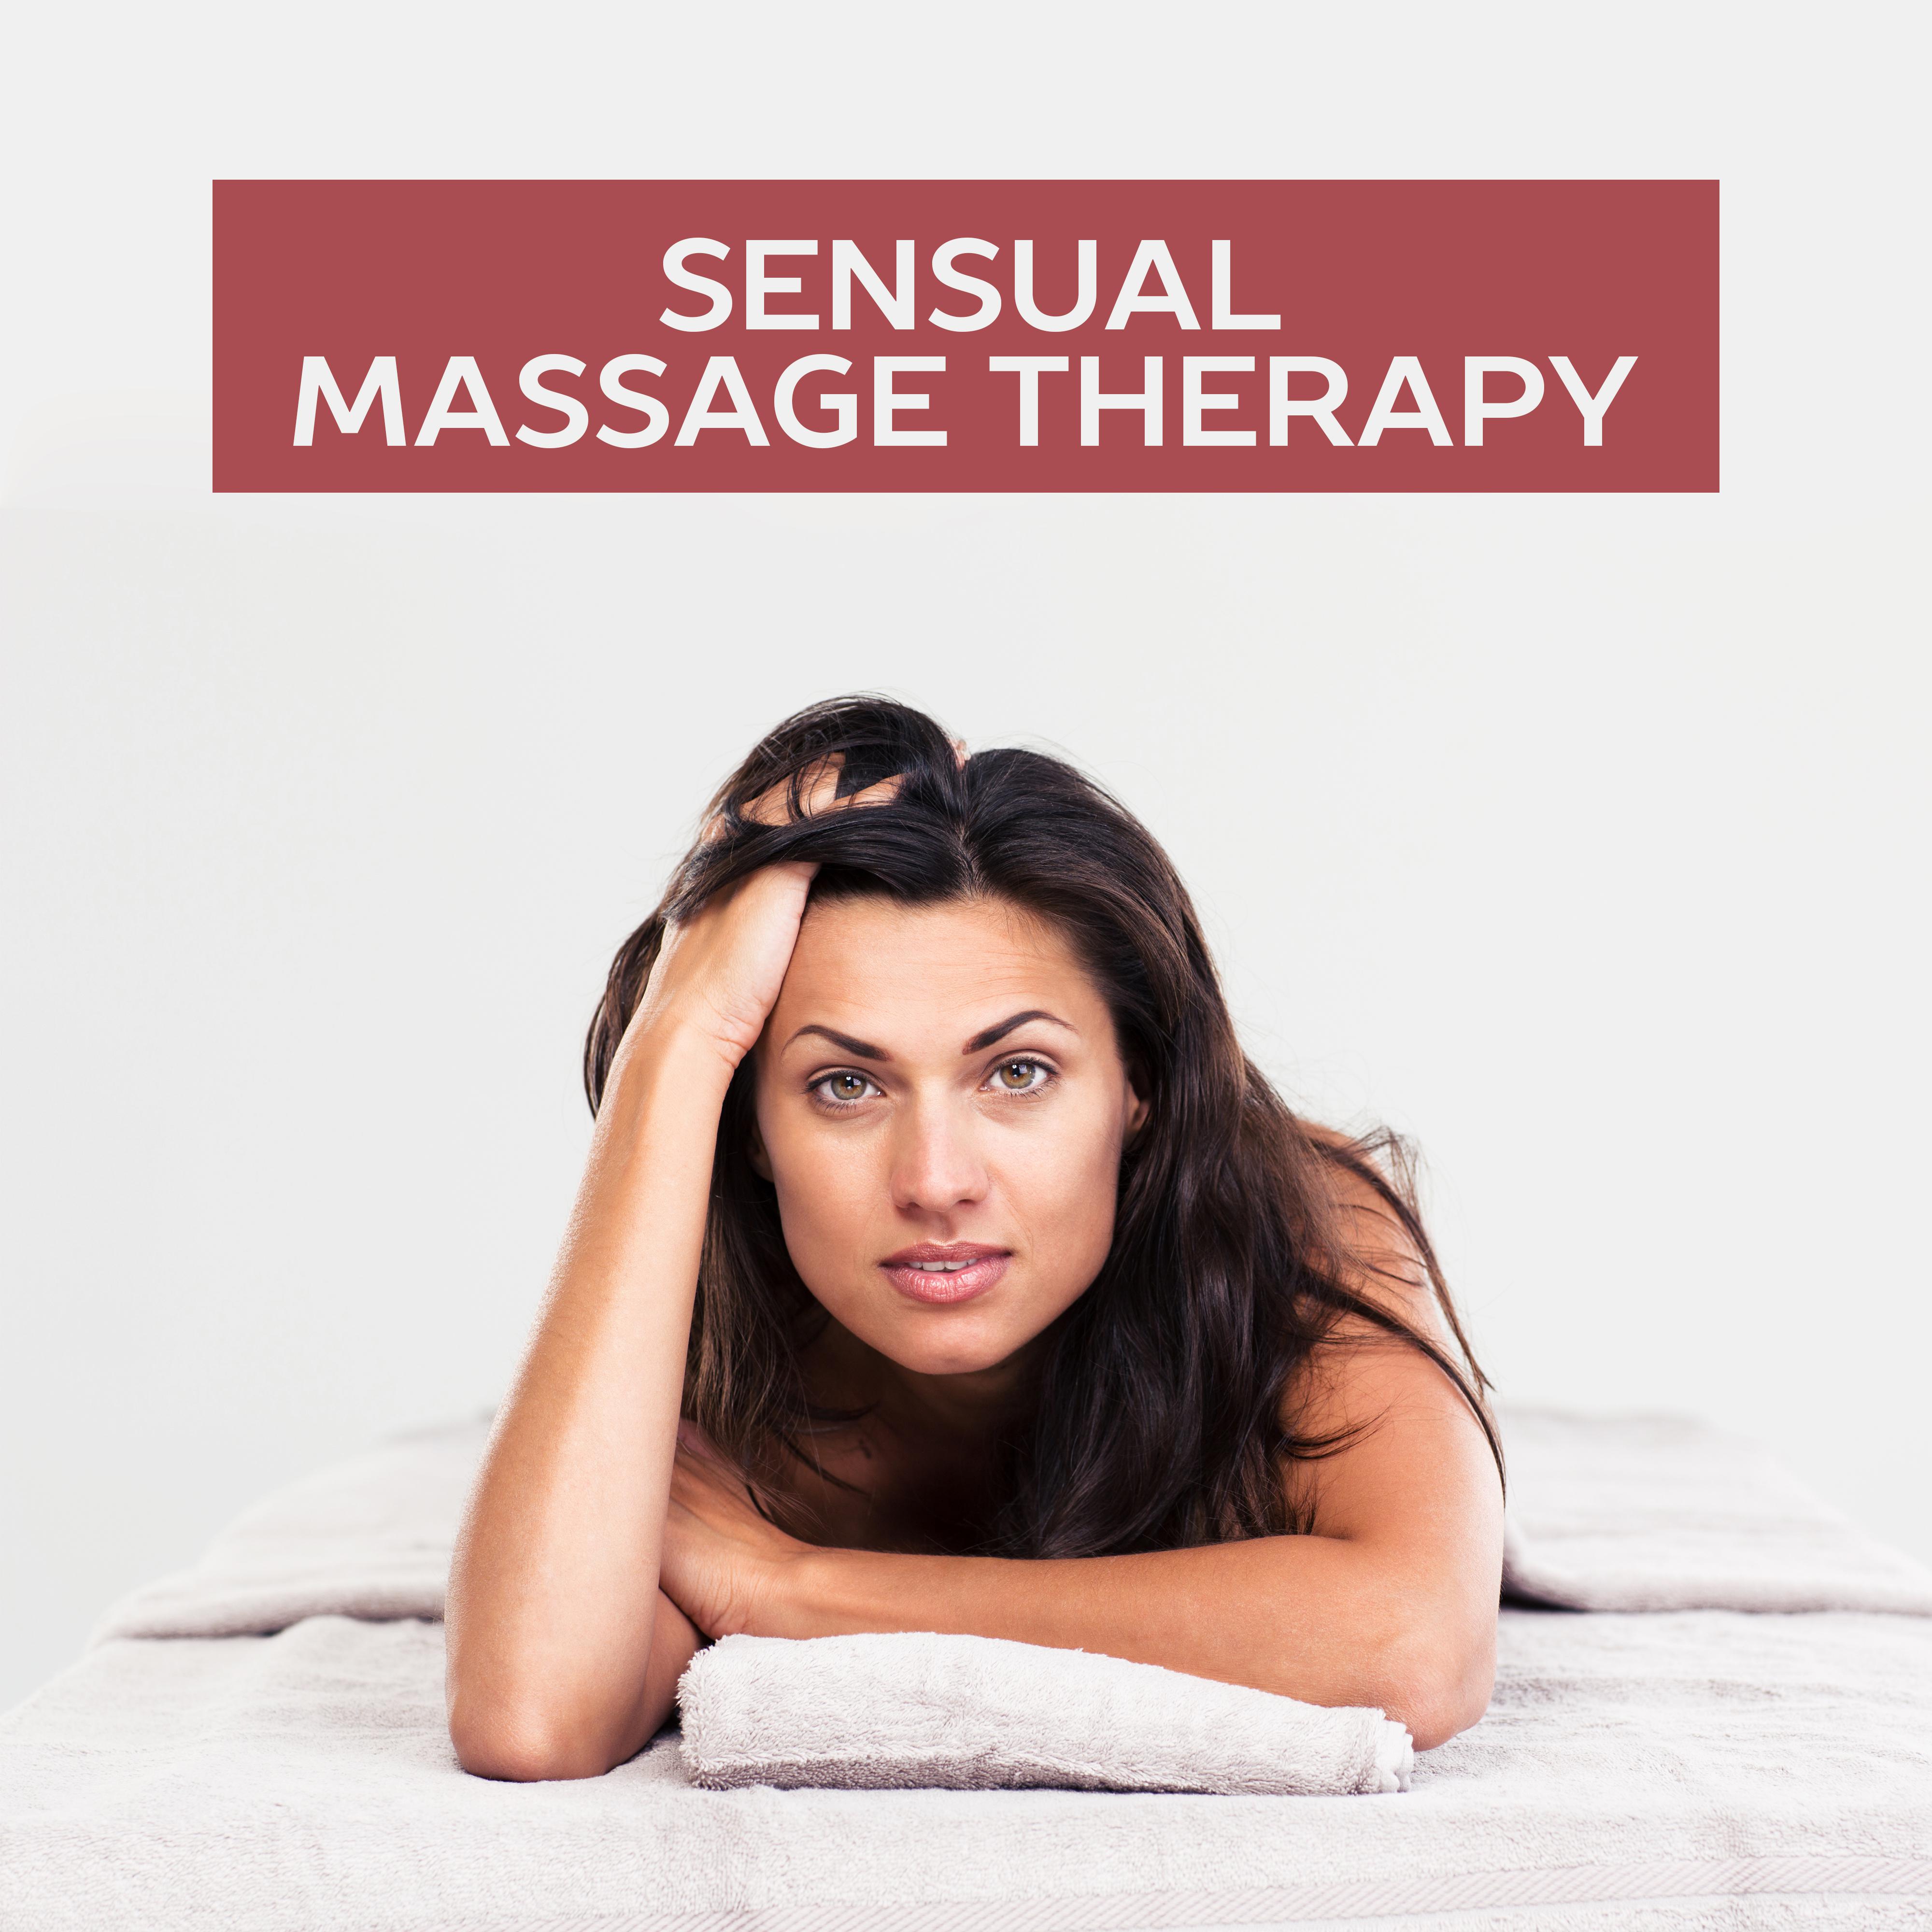 Sensual Massage Therapy – Relaxing Music, Massage, Spa, Wellness Background Music, Serenity New Age